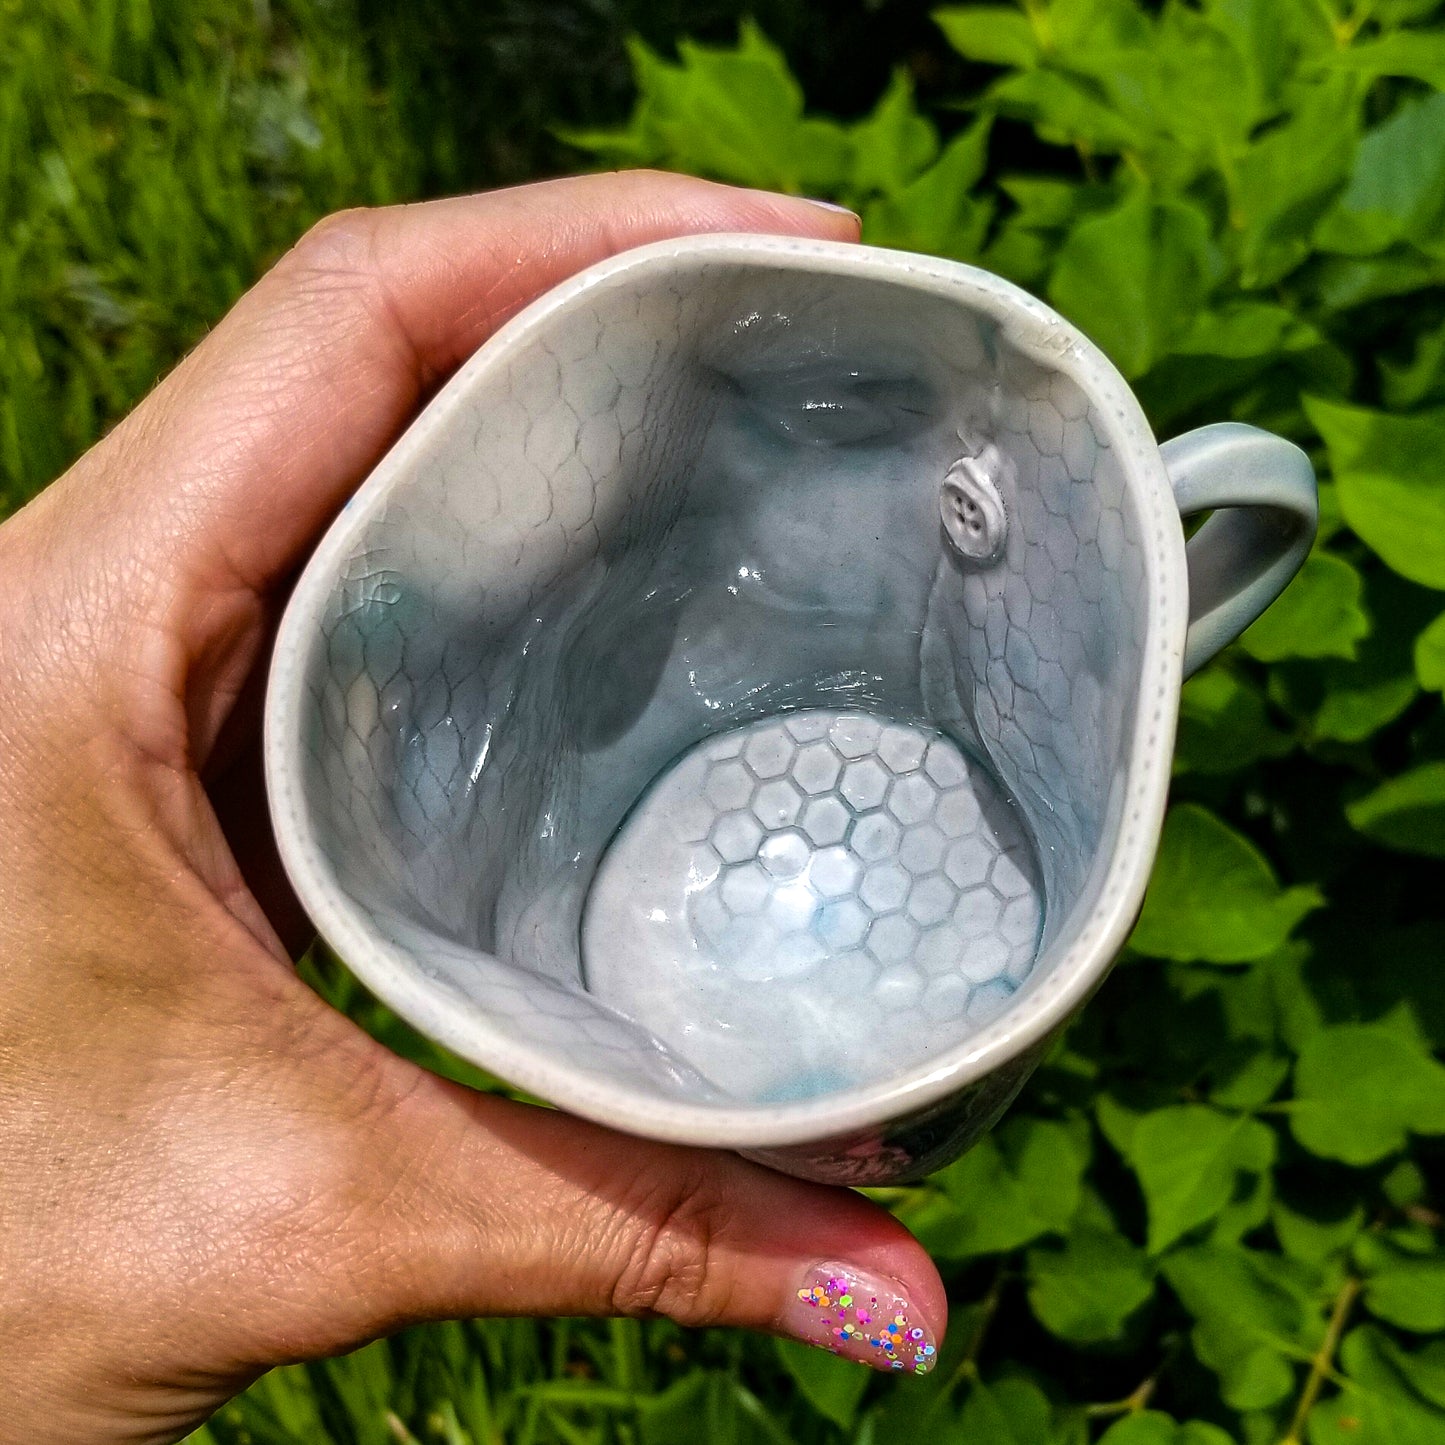 Inside detail of hndmade stoneware ceramic soda fired mug blue color with pressed textures